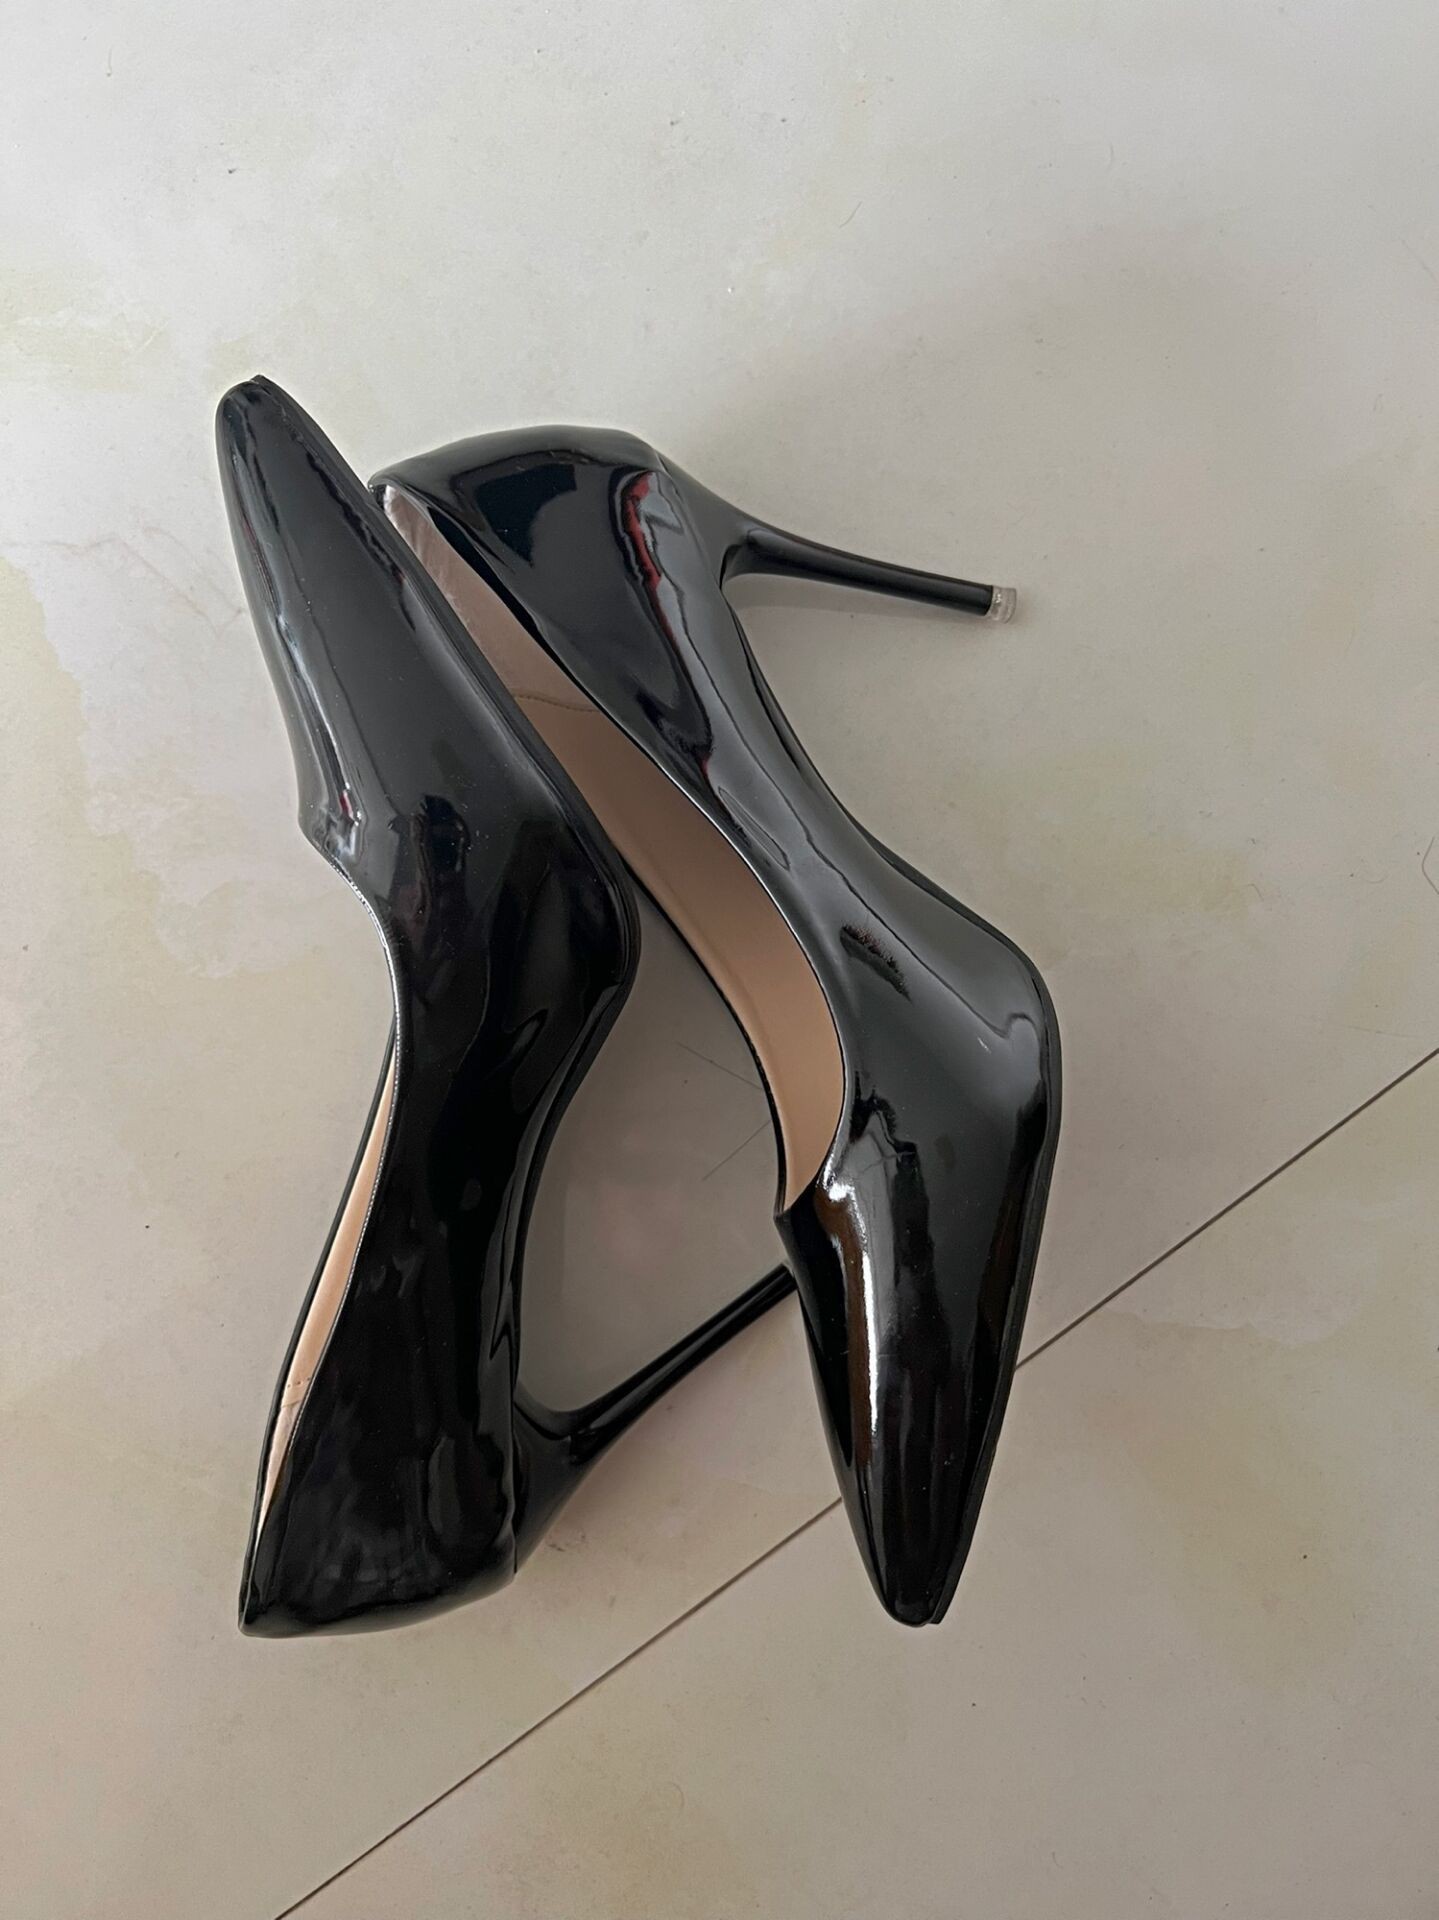 High Heels Stiletto Shiny Pointy 10CM Large Size Shoes